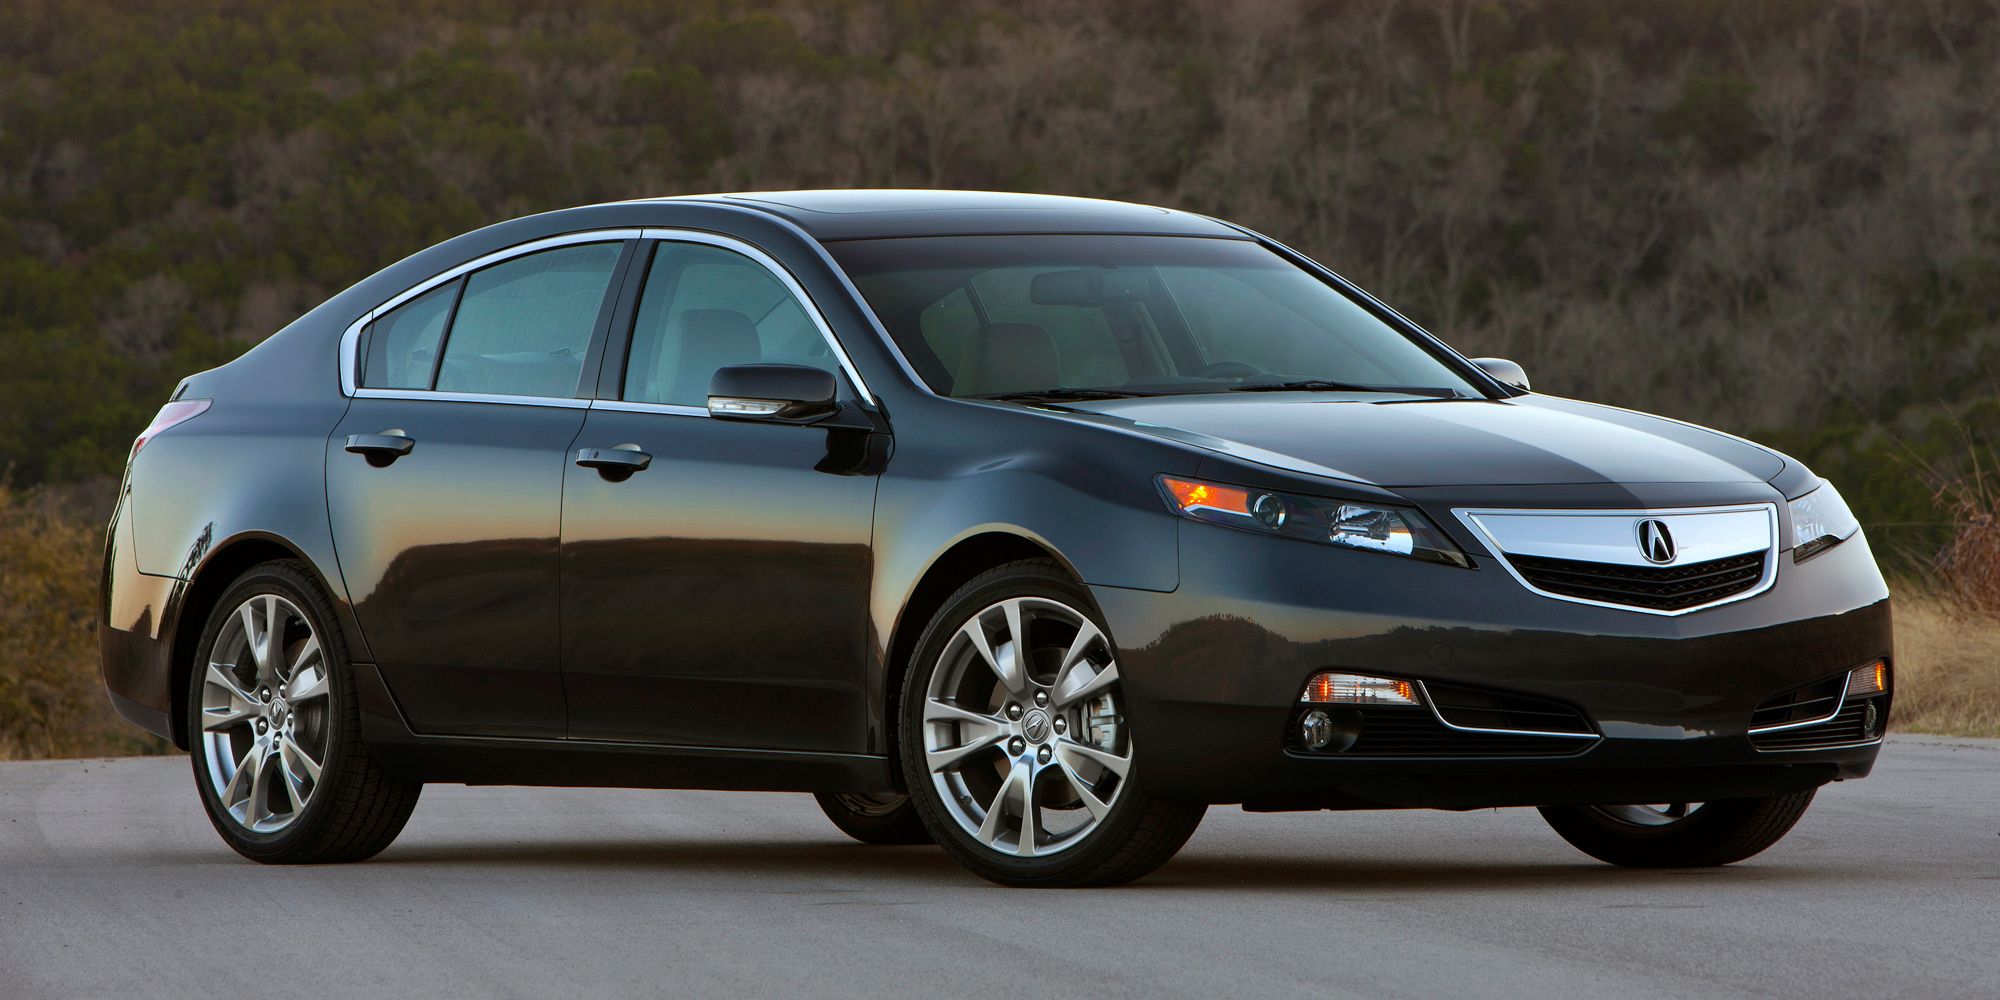 The front of the fourth generation Acura TL